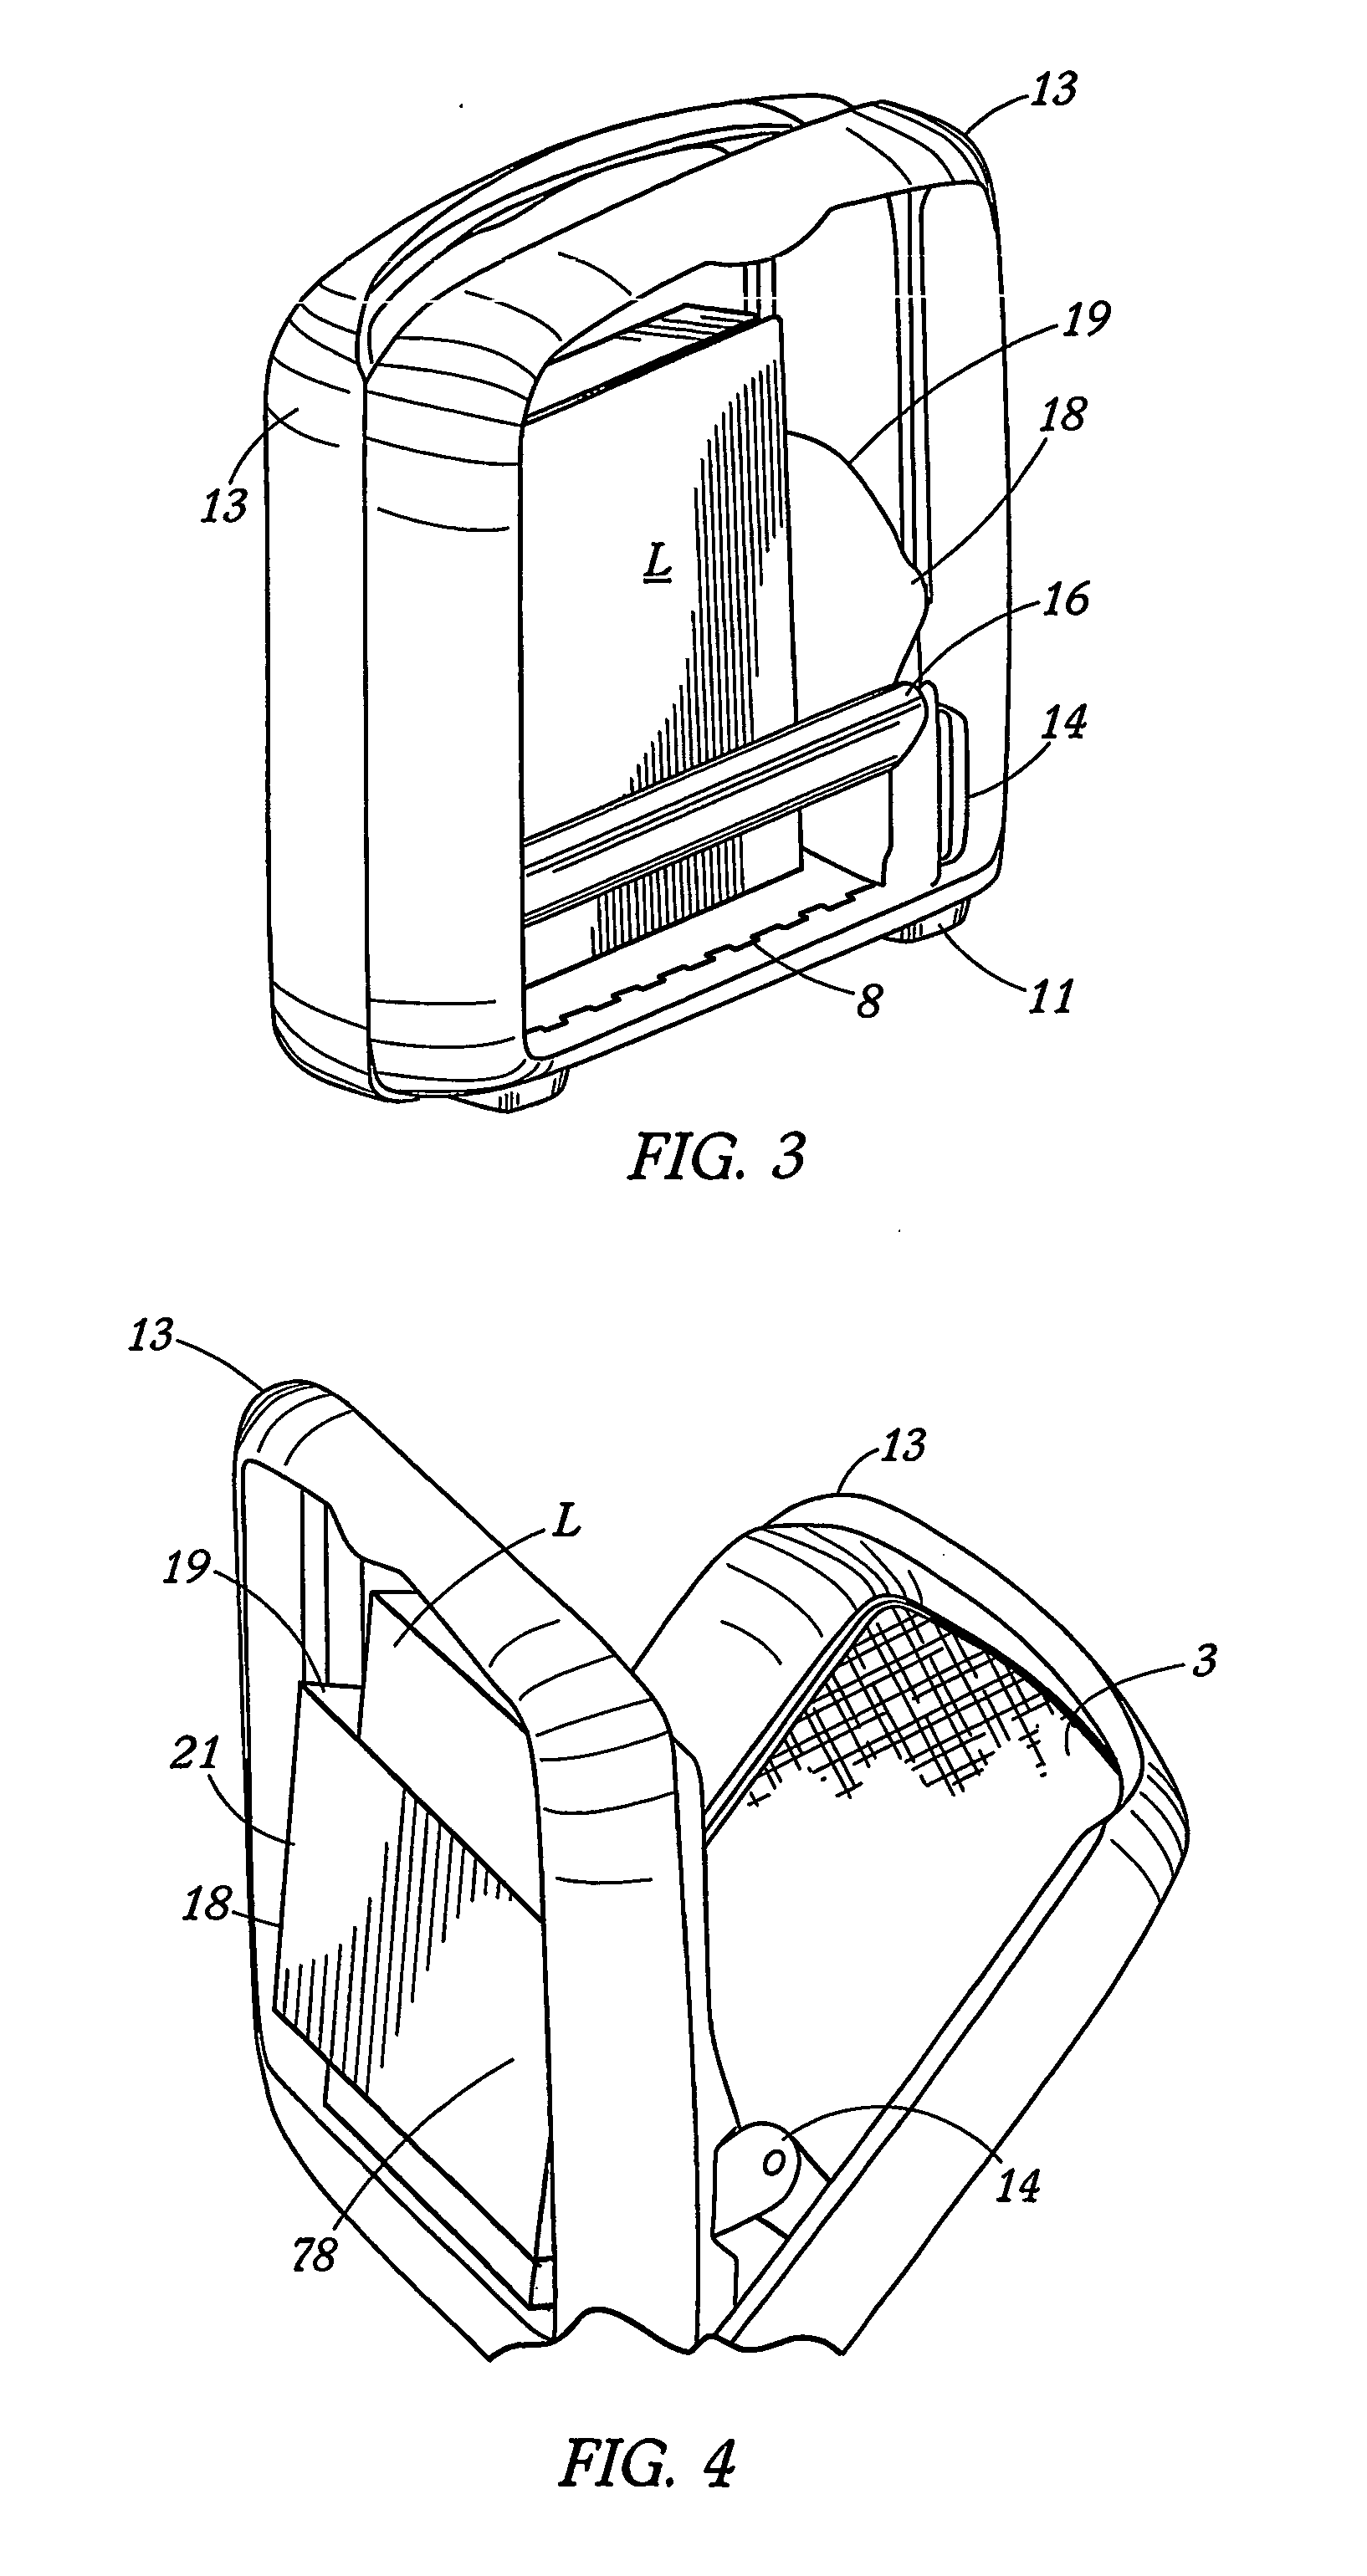 Device for holding a laptop computer in a hardside computer or attache case